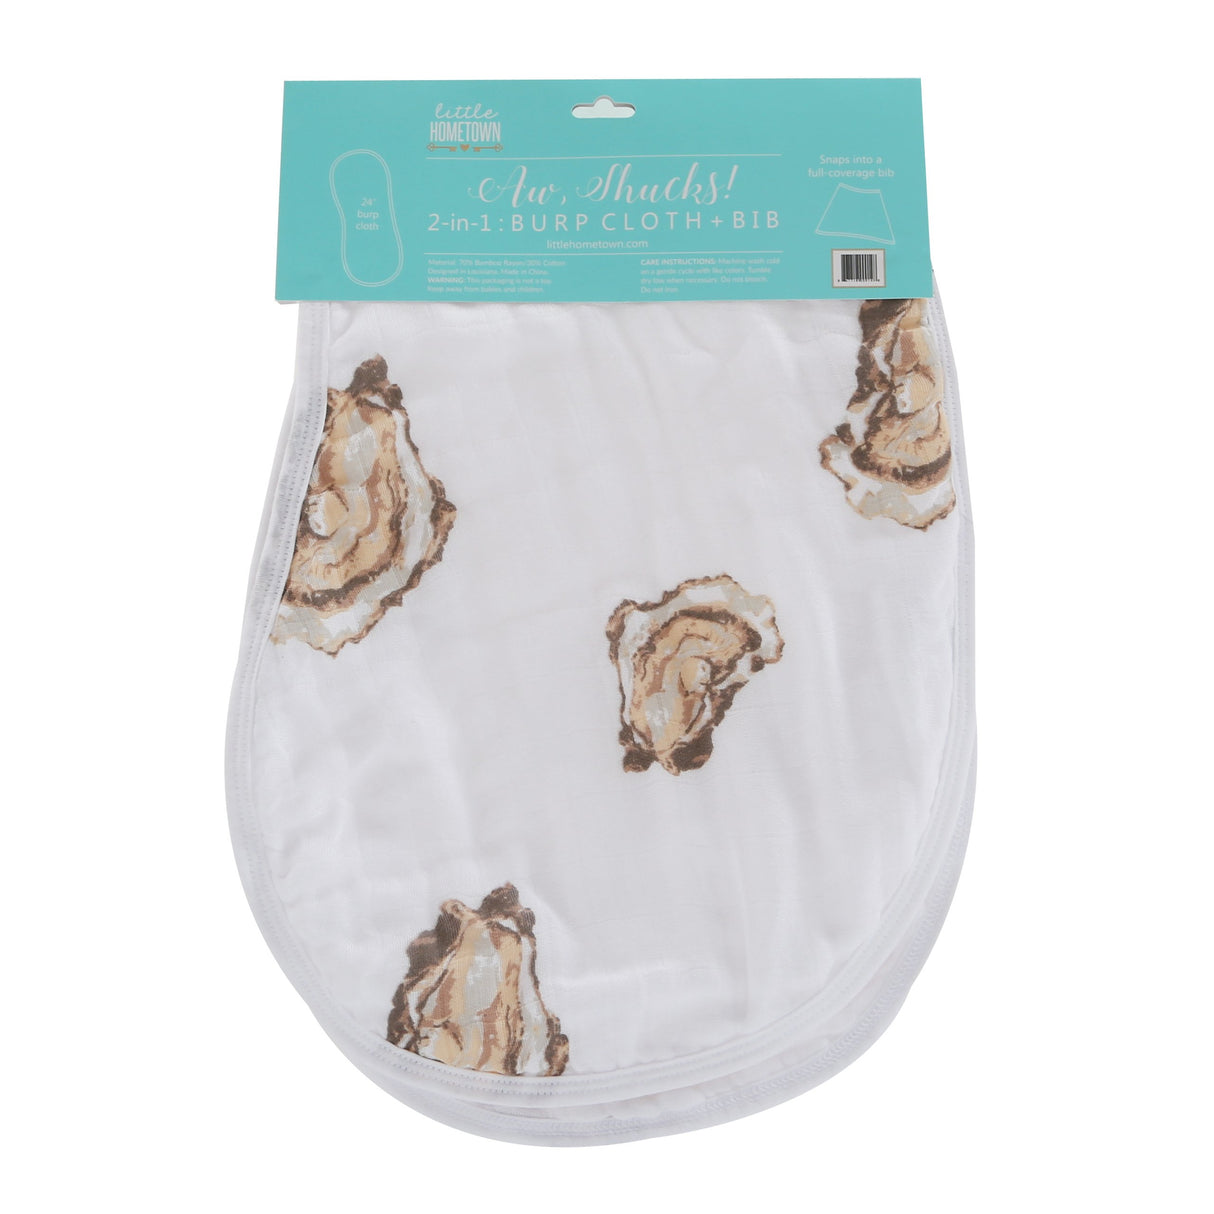 2-in-1 Burp Cloth and Bib: Aw Shucks! Oyster by Little Hometown - Aiden's Corner Baby & Toddler Clothes, Toys, Teethers, Feeding and Accesories